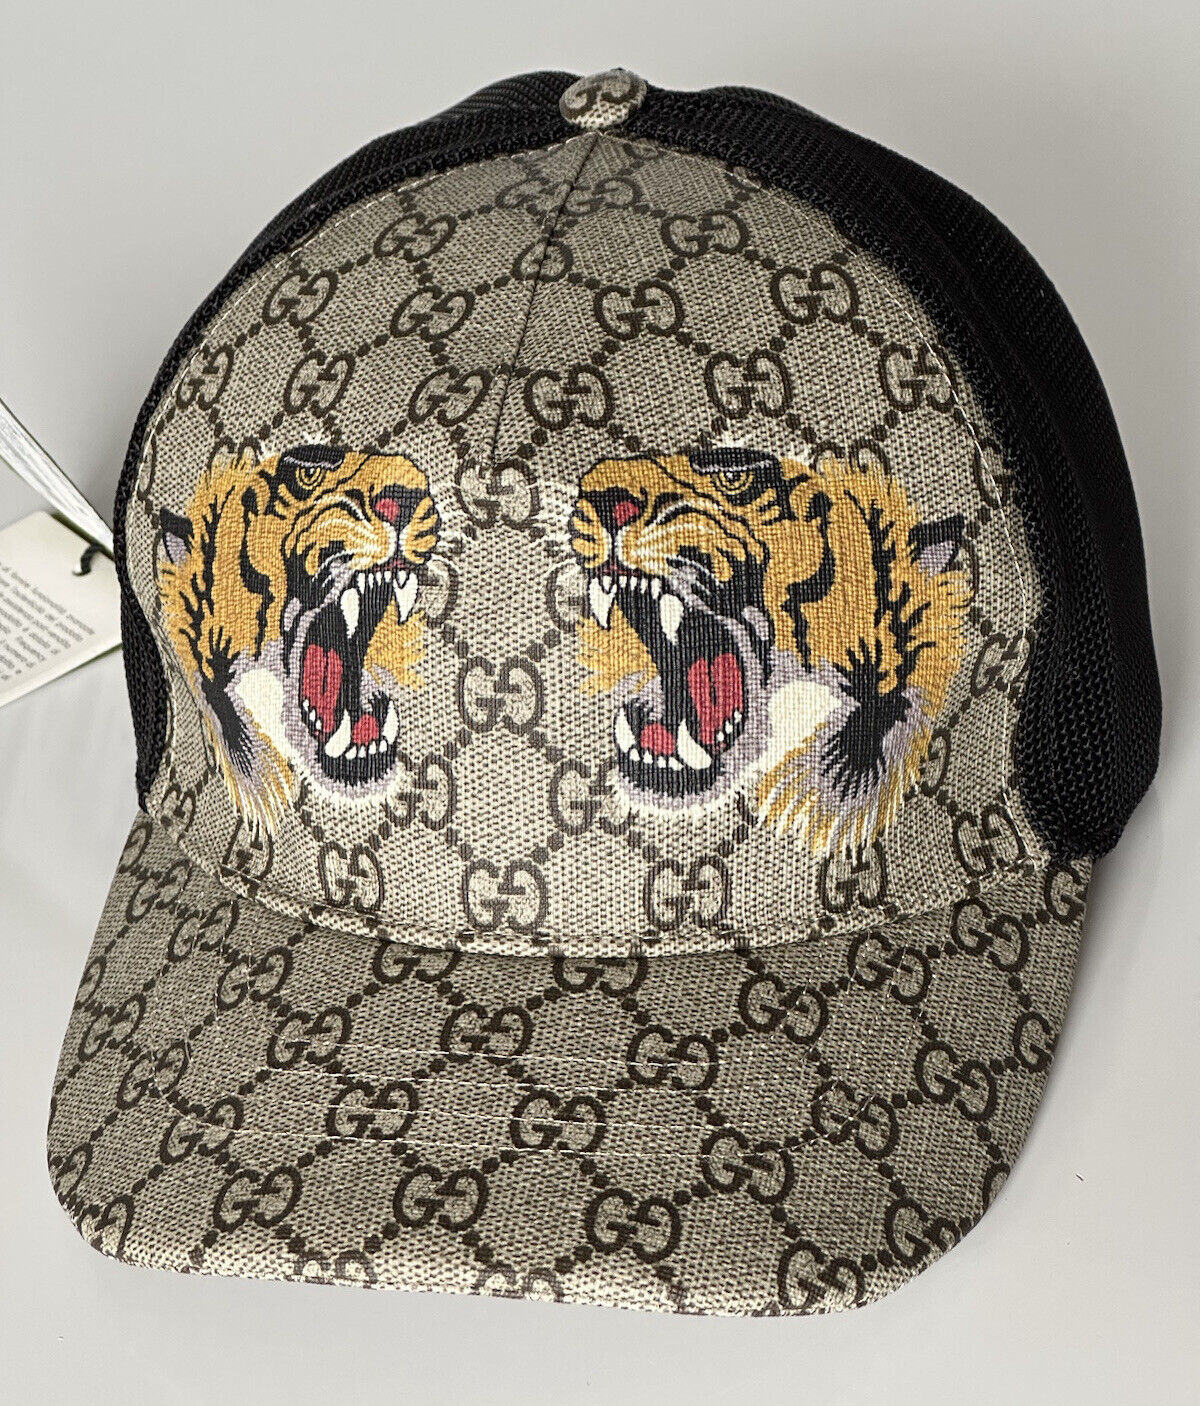 NWT Gucci Tiger GG Print Baseball Cap Brown Hat L (59 cm) Made in Italy 426887